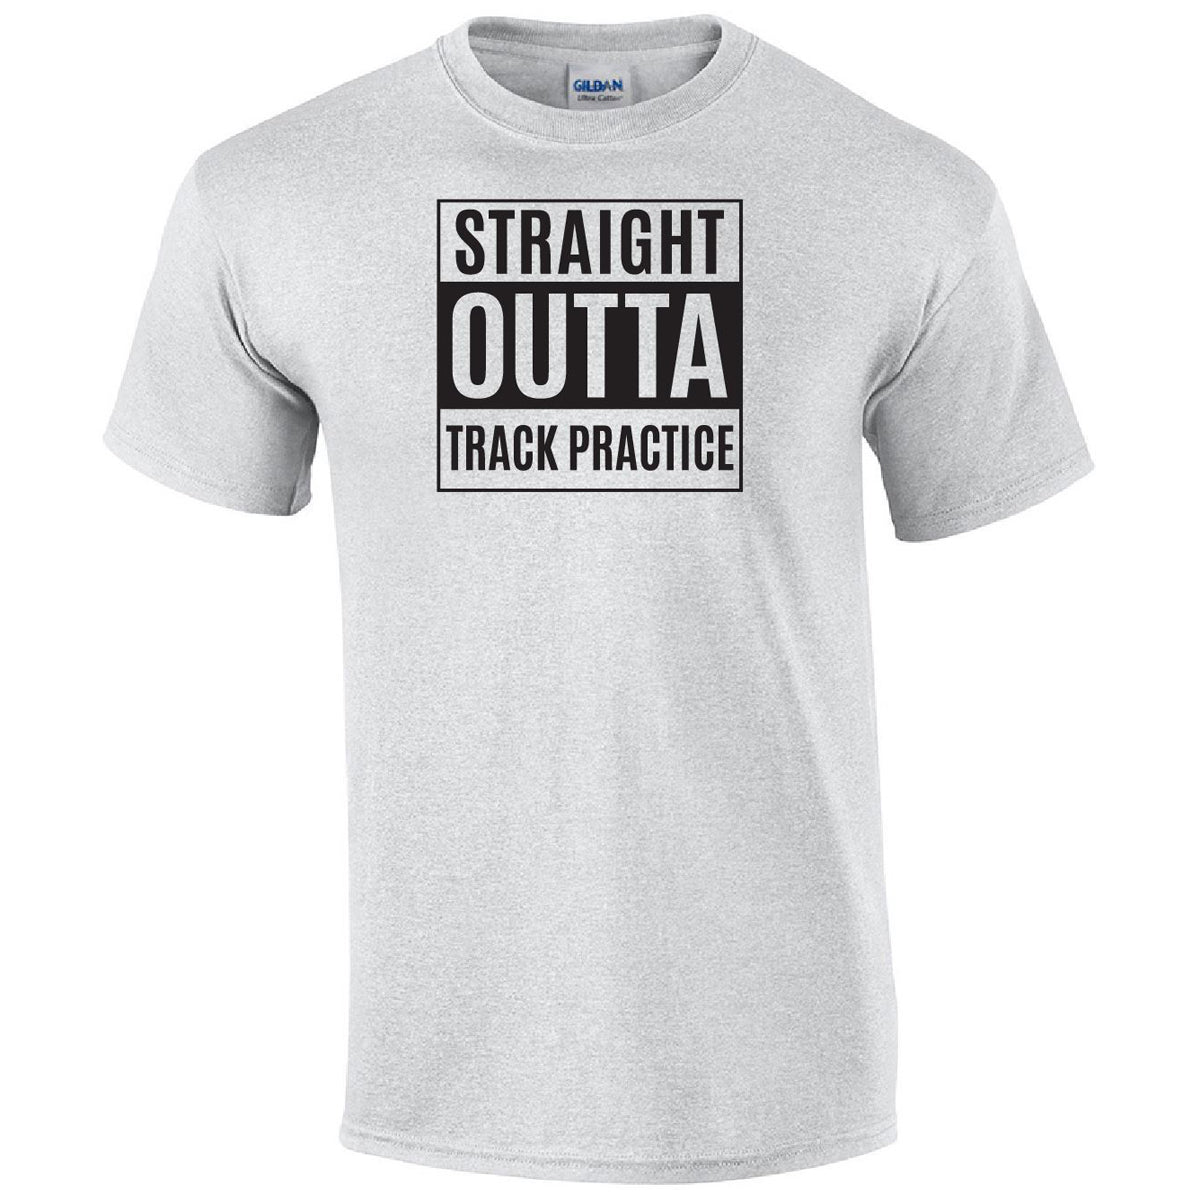 Straight Outta Track Practice Printed Tee Humorous Shirt 411 Youth Medium Ash 